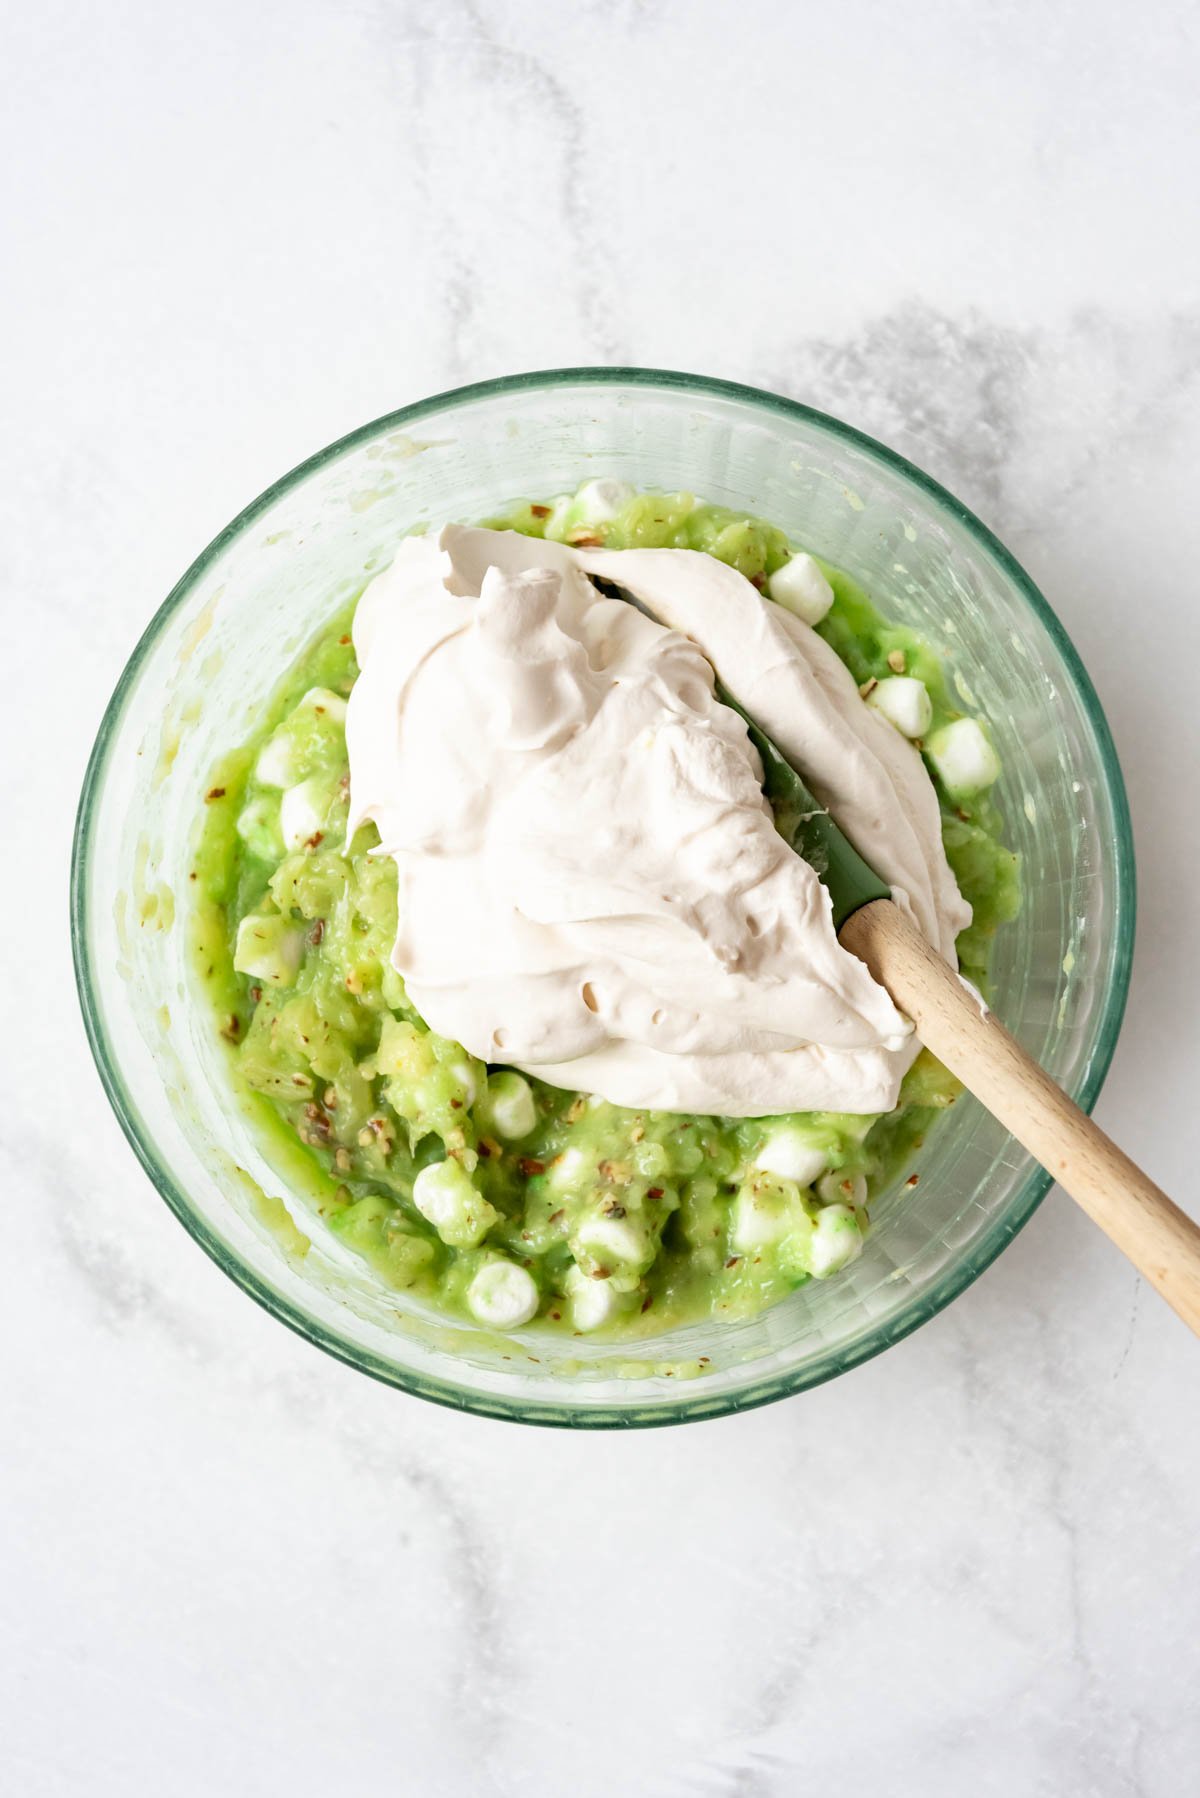 Folding whipped cream into watergate salad.